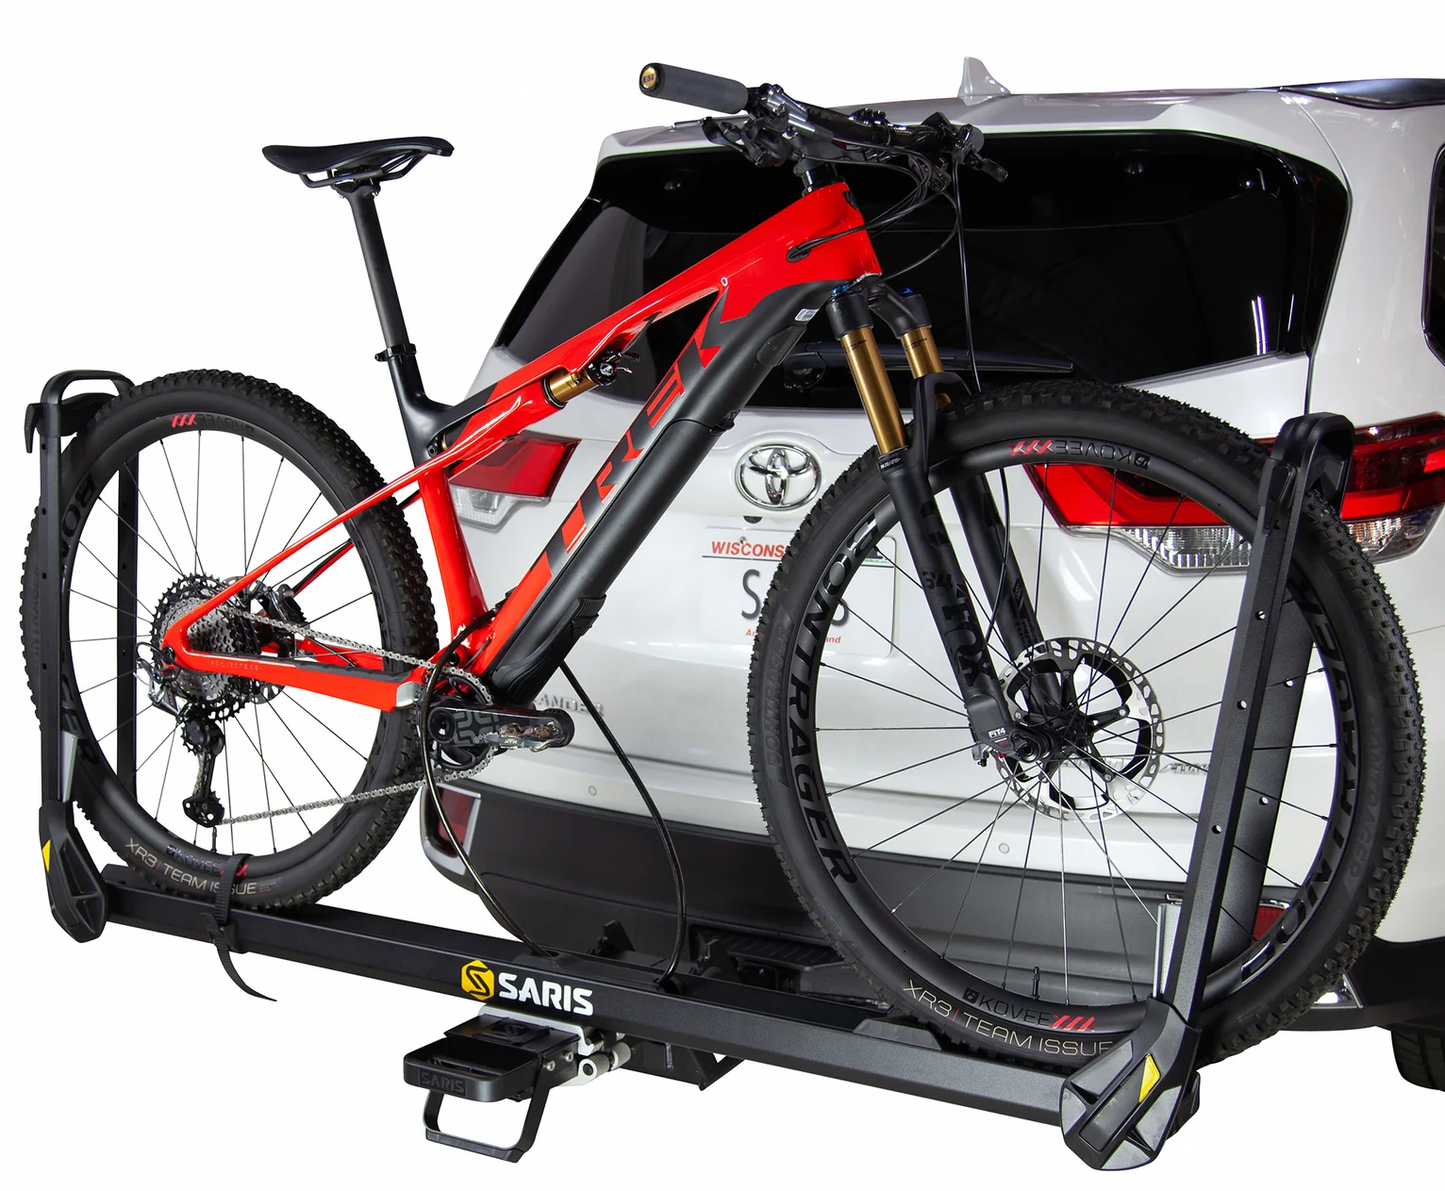 MHS 1 BIKE PACKAGE, A FUTURE PROOF MODULAR HITCH SYSTEM